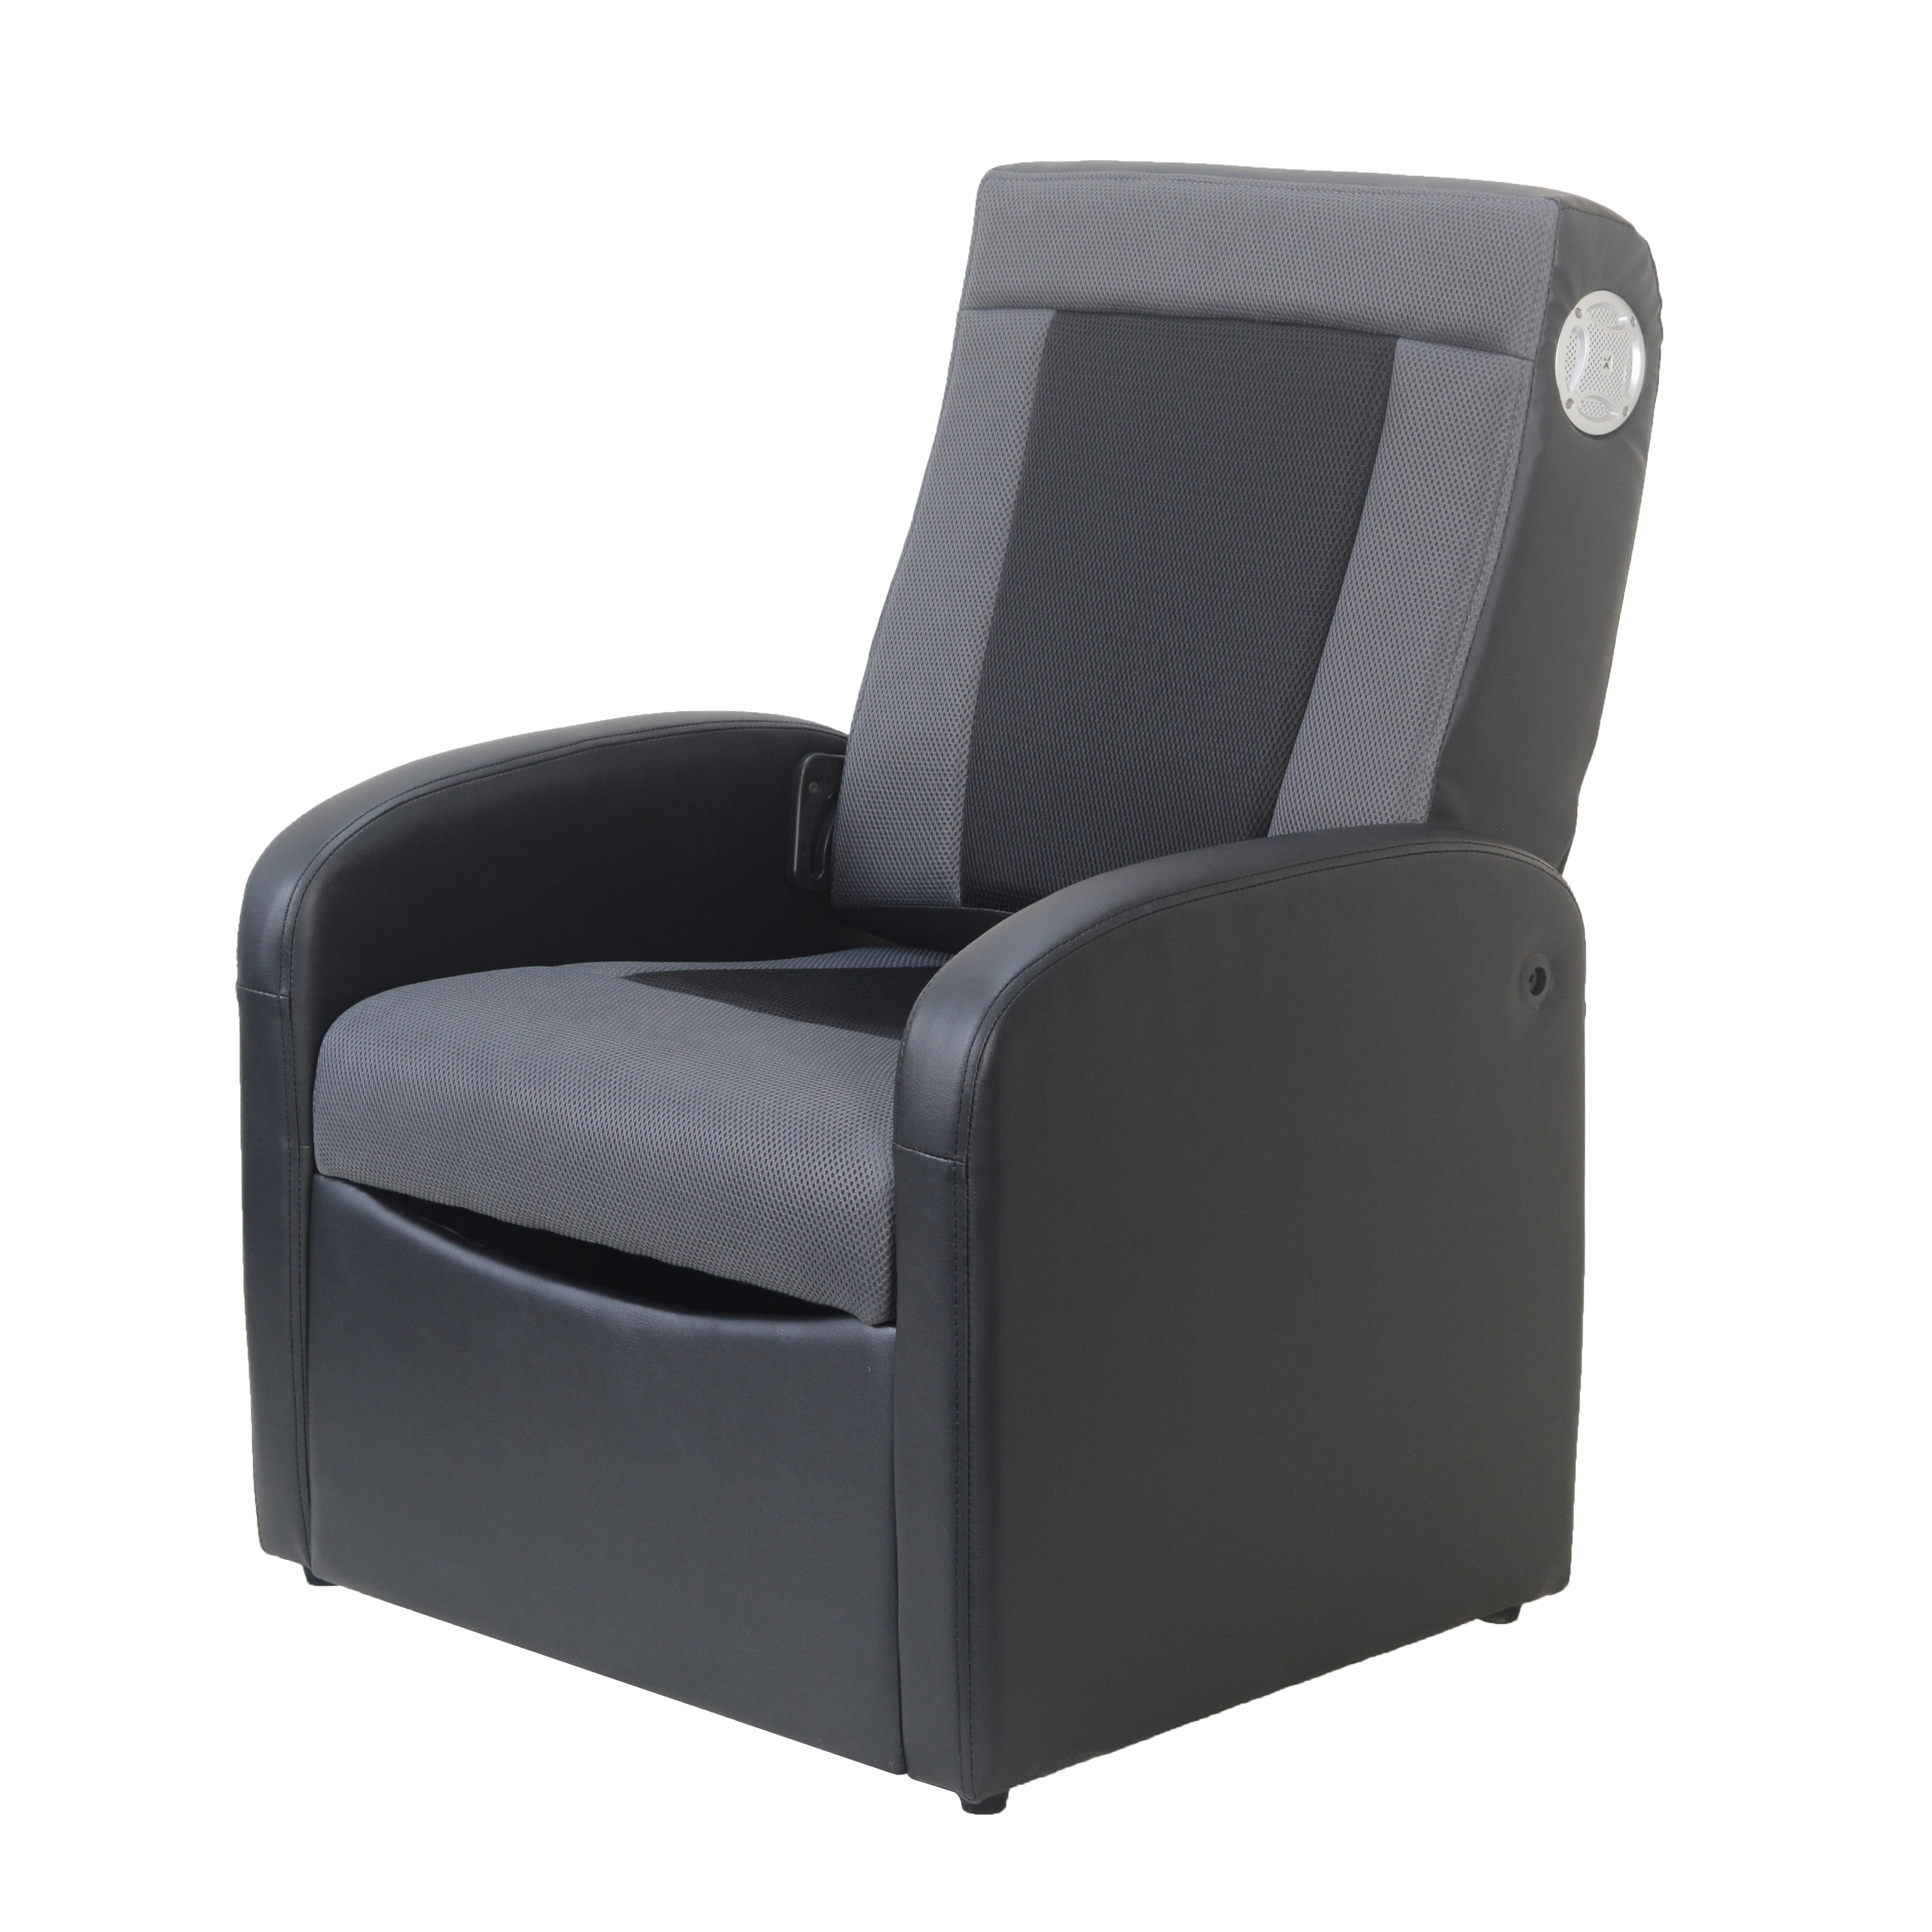 X Rocker 2.0 Flip Gaming Chair with Storage | Child and Teen | Black/Gray | 25.59 x 26.77 x 35.04 inches - image 4 of 6